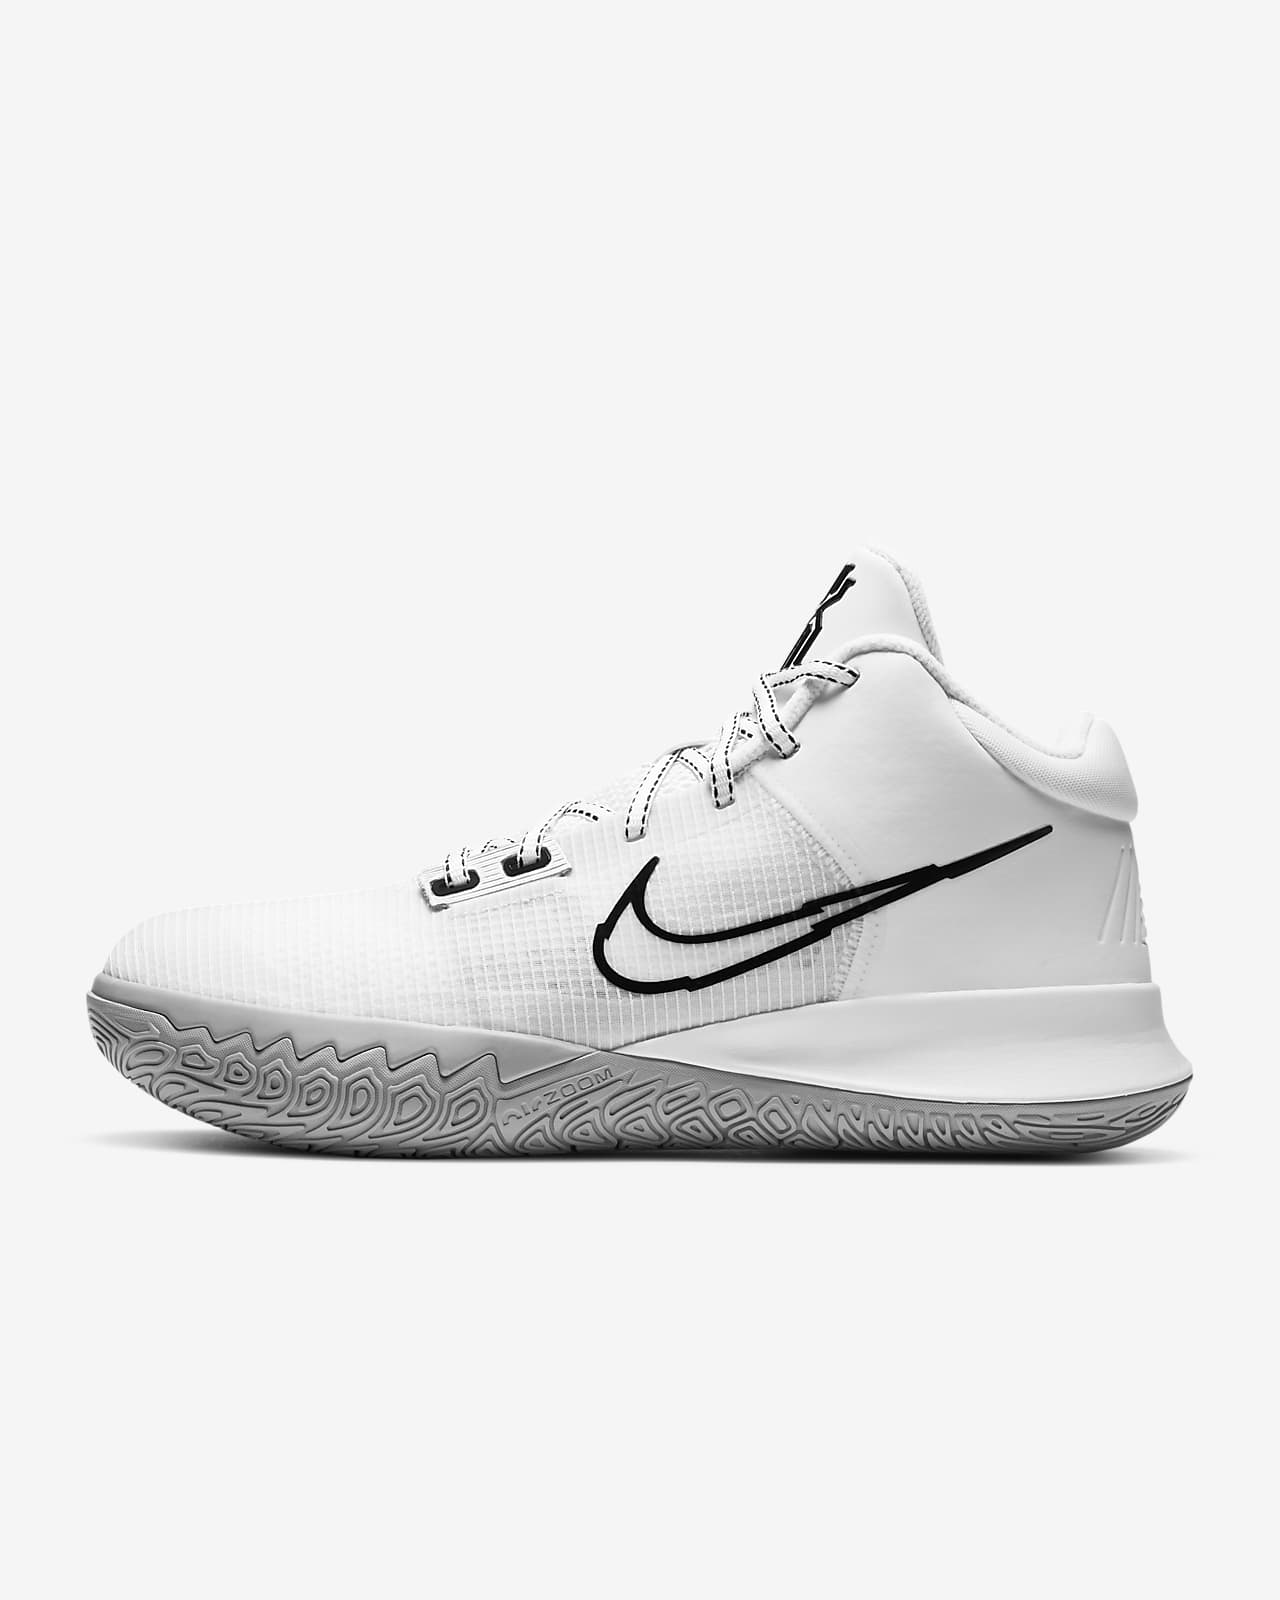 kyrie shoes images